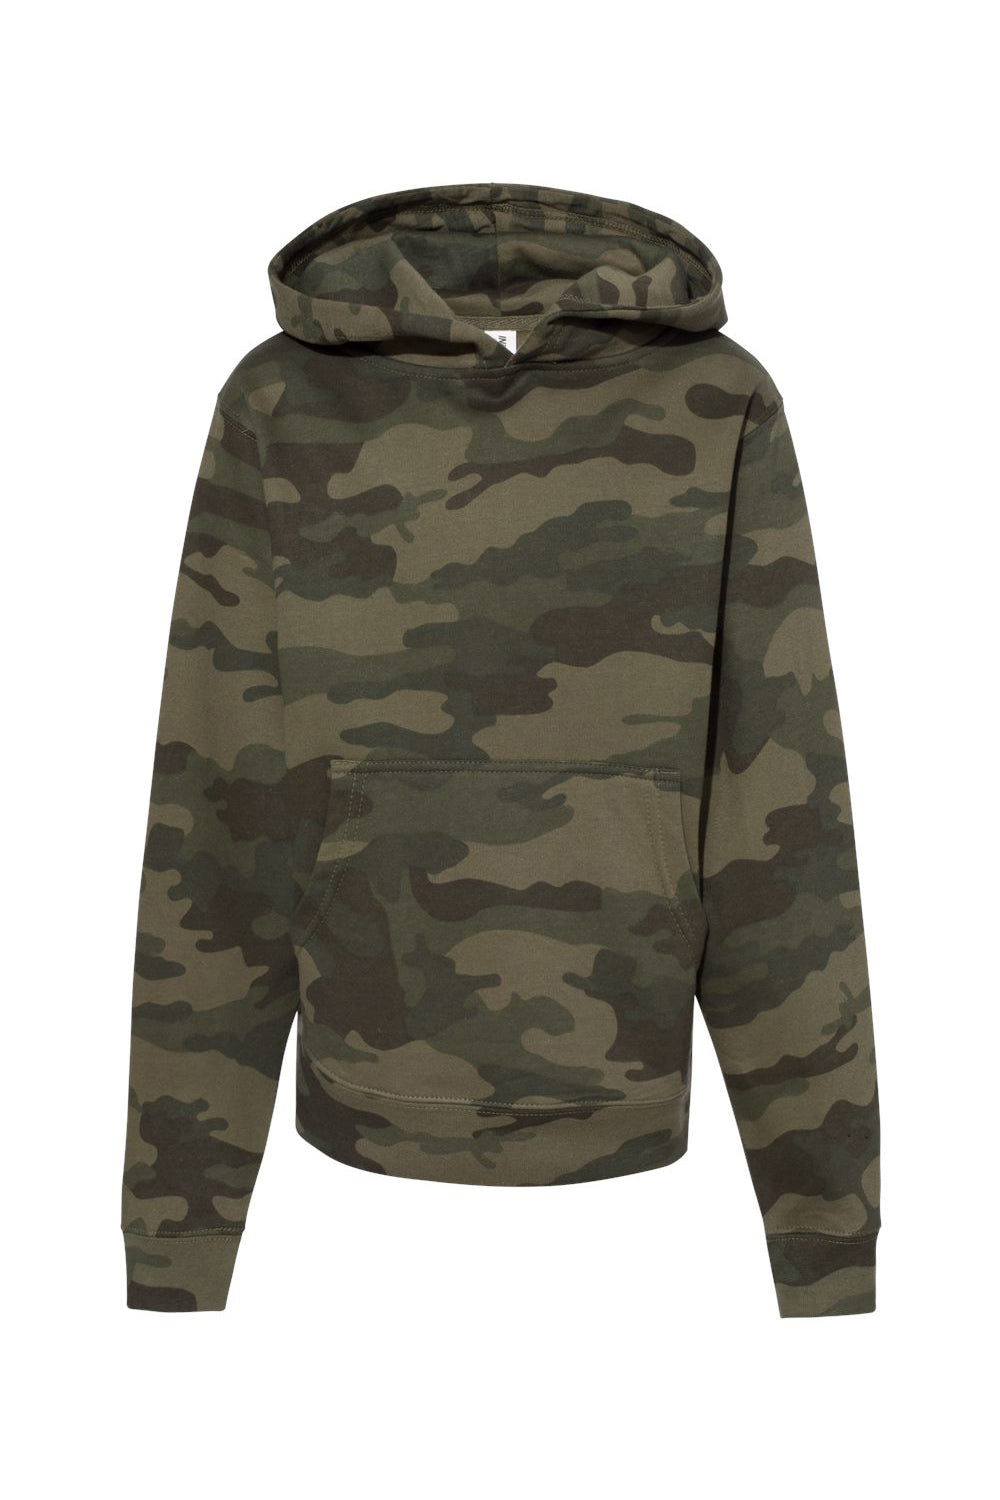 Independent Trading Co. SS4001Y Youth Hooded Sweatshirt Hoodie Forest Green Camo Flat Front